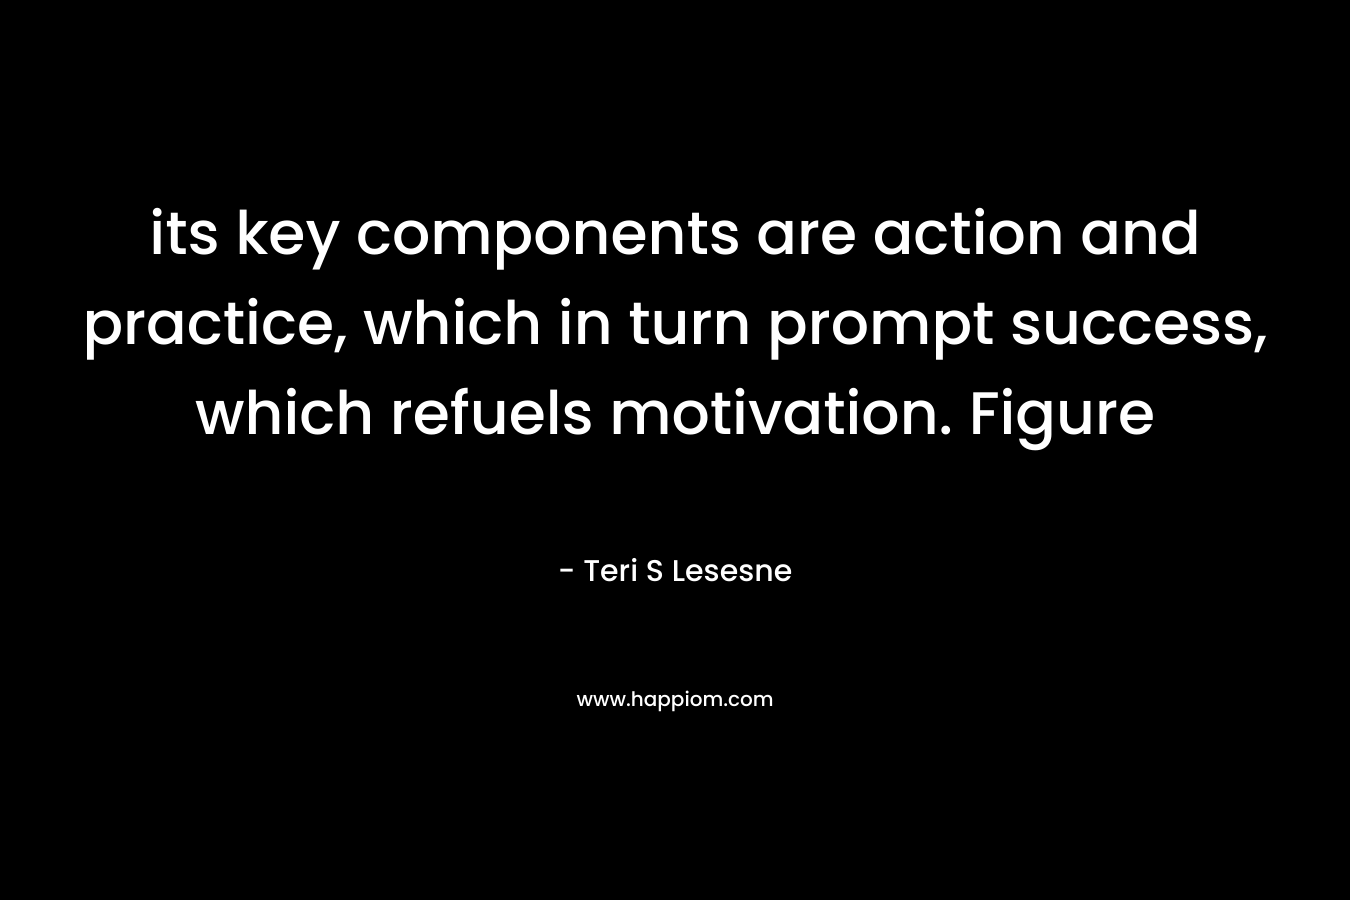 its key components are action and practice, which in turn prompt success, which refuels motivation. Figure